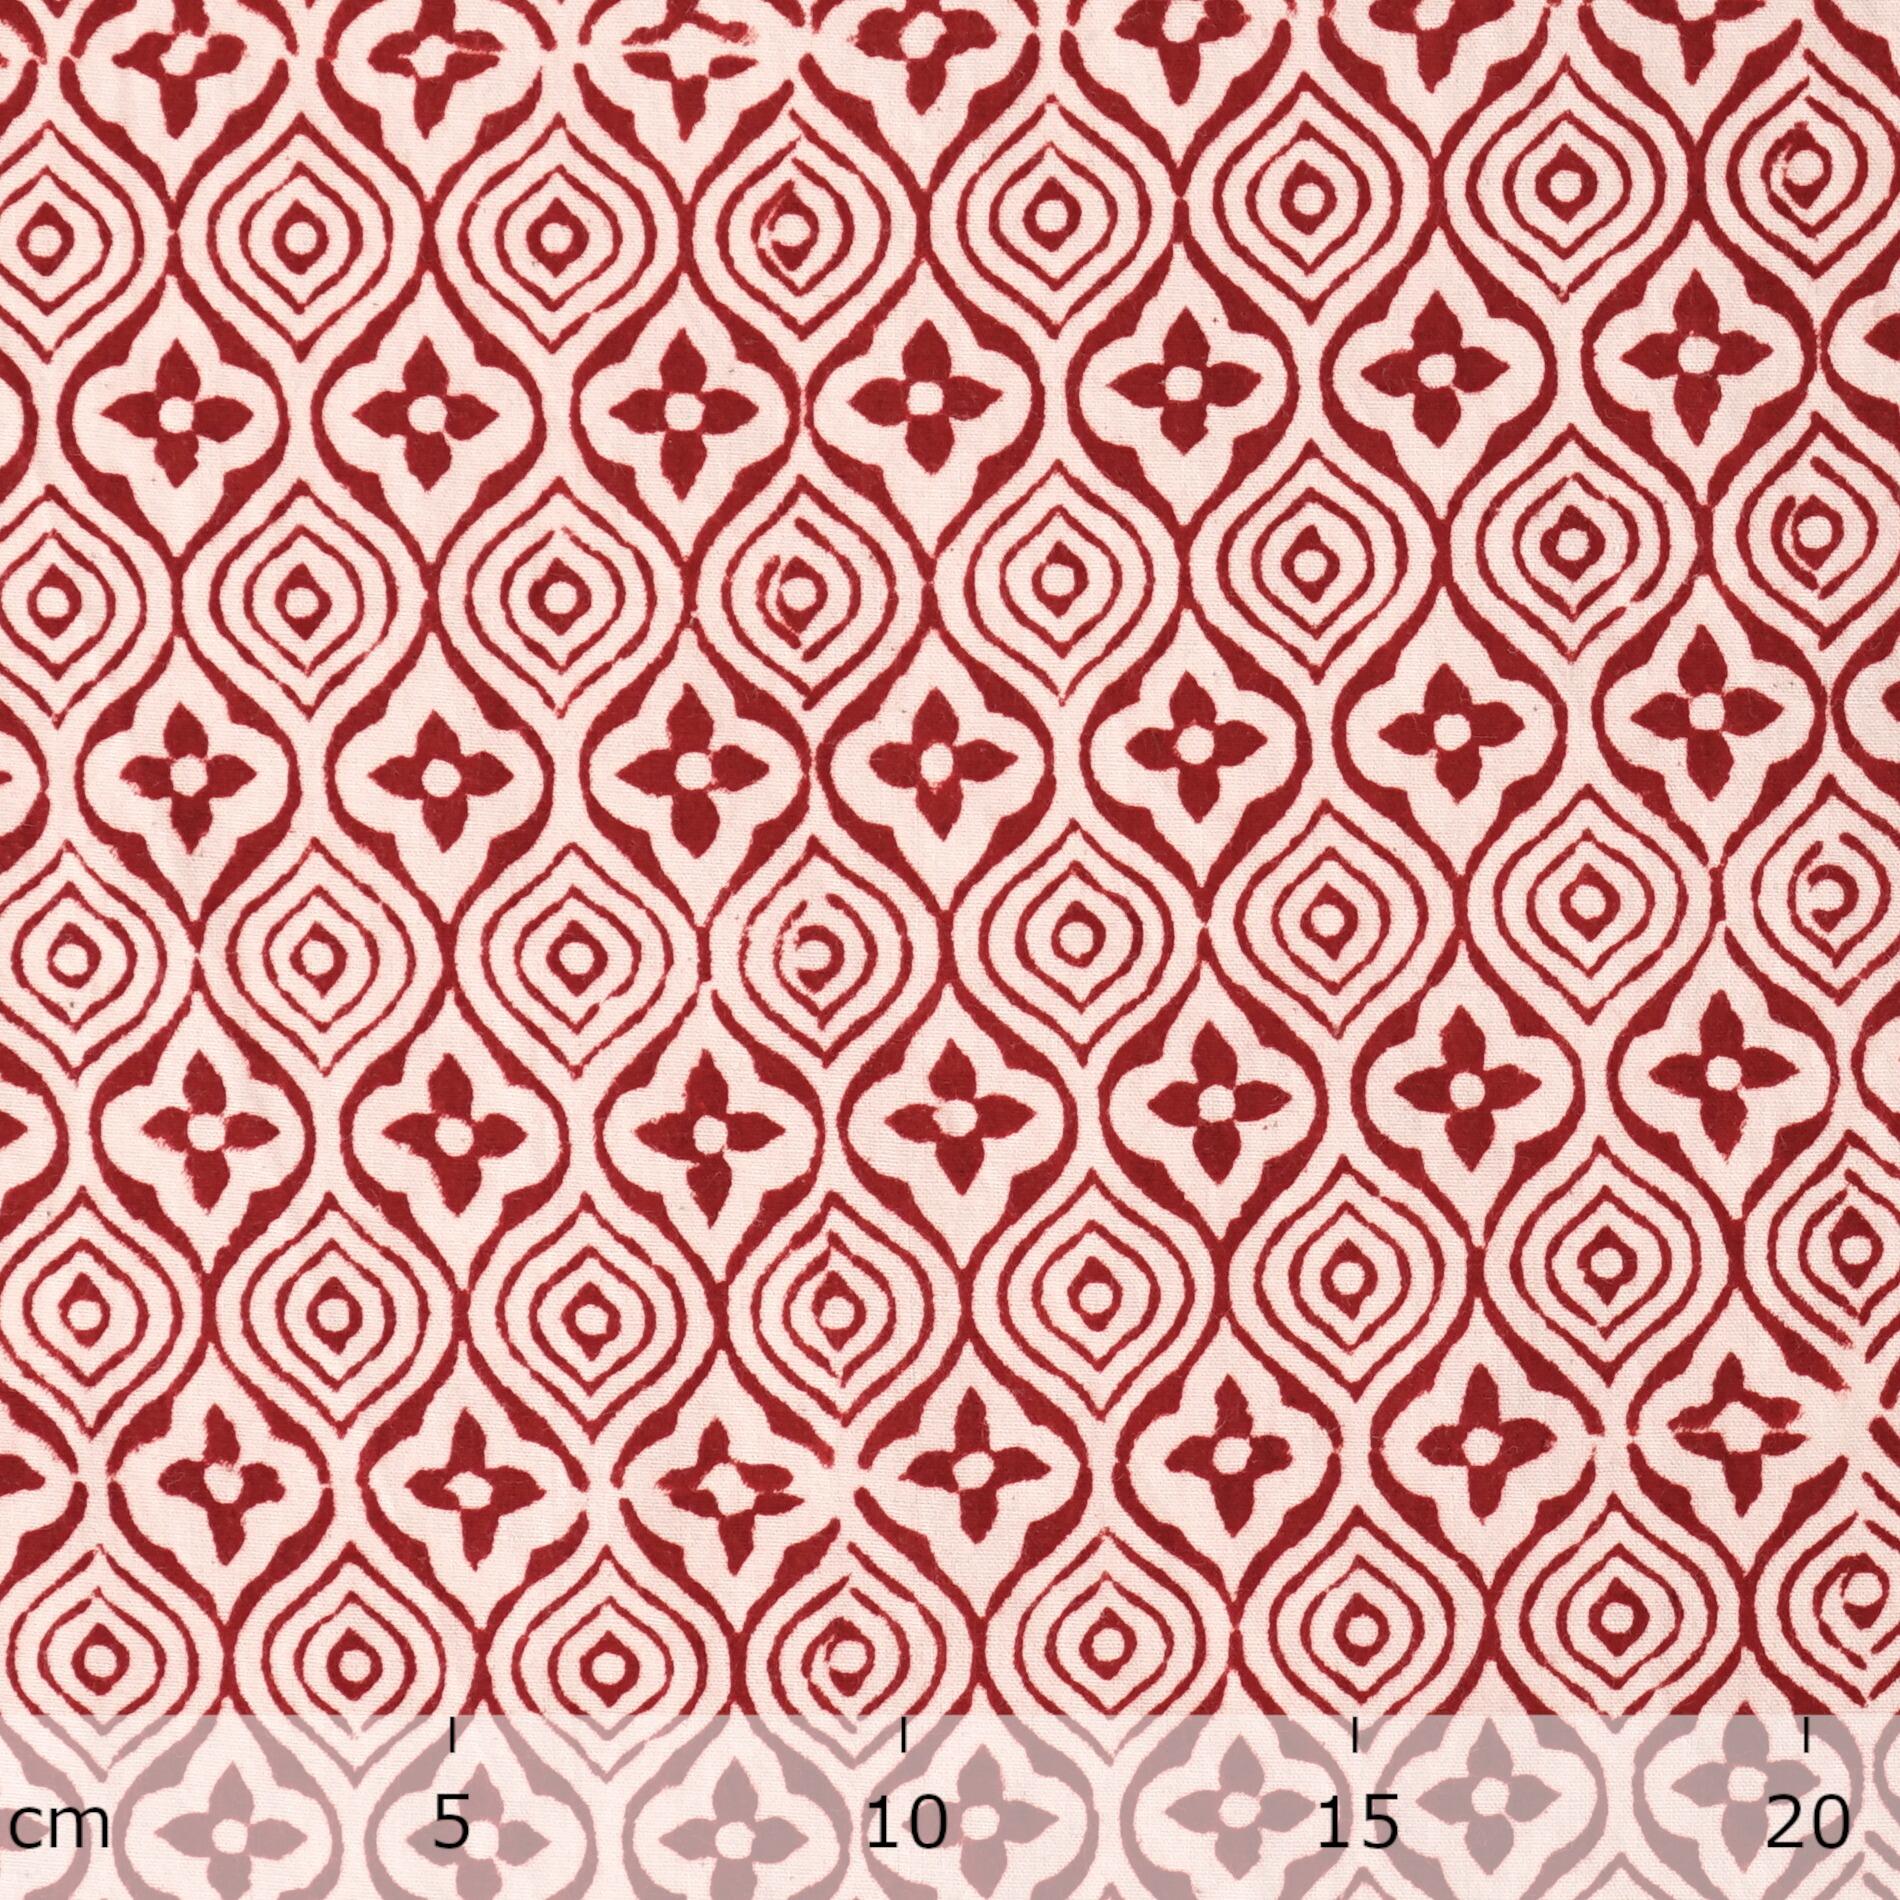 100% Block-Printed Cotton Fabric From India - Bagh Method - Alizarin Red Turkish Delight Print - Ruler